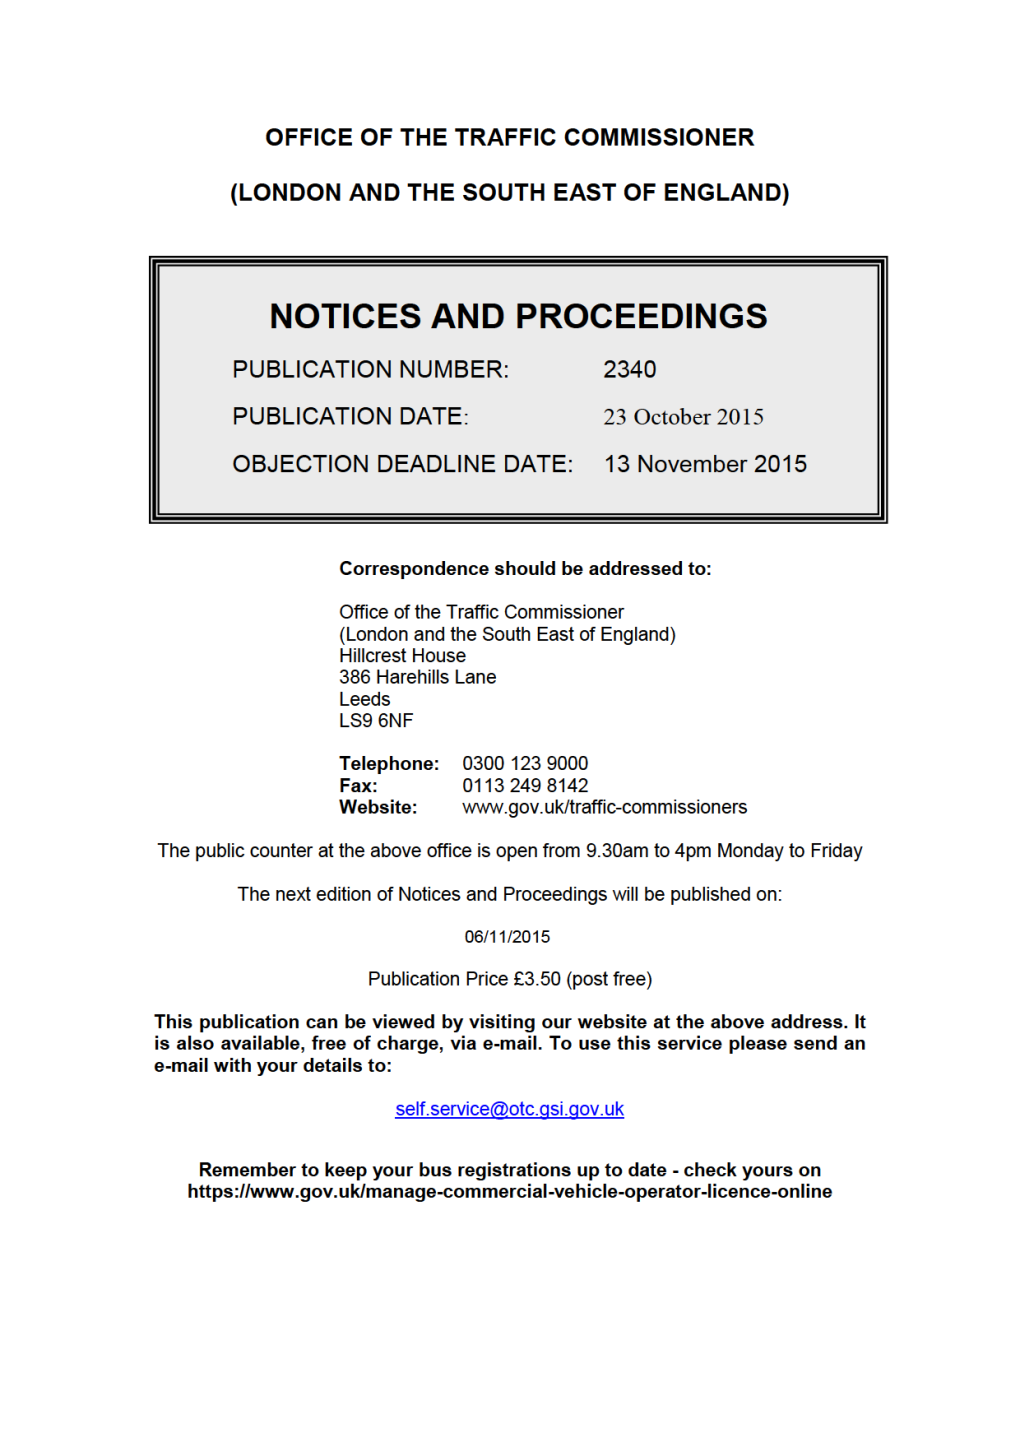 NOTICES and PROCEEDINGS 23 October 2015